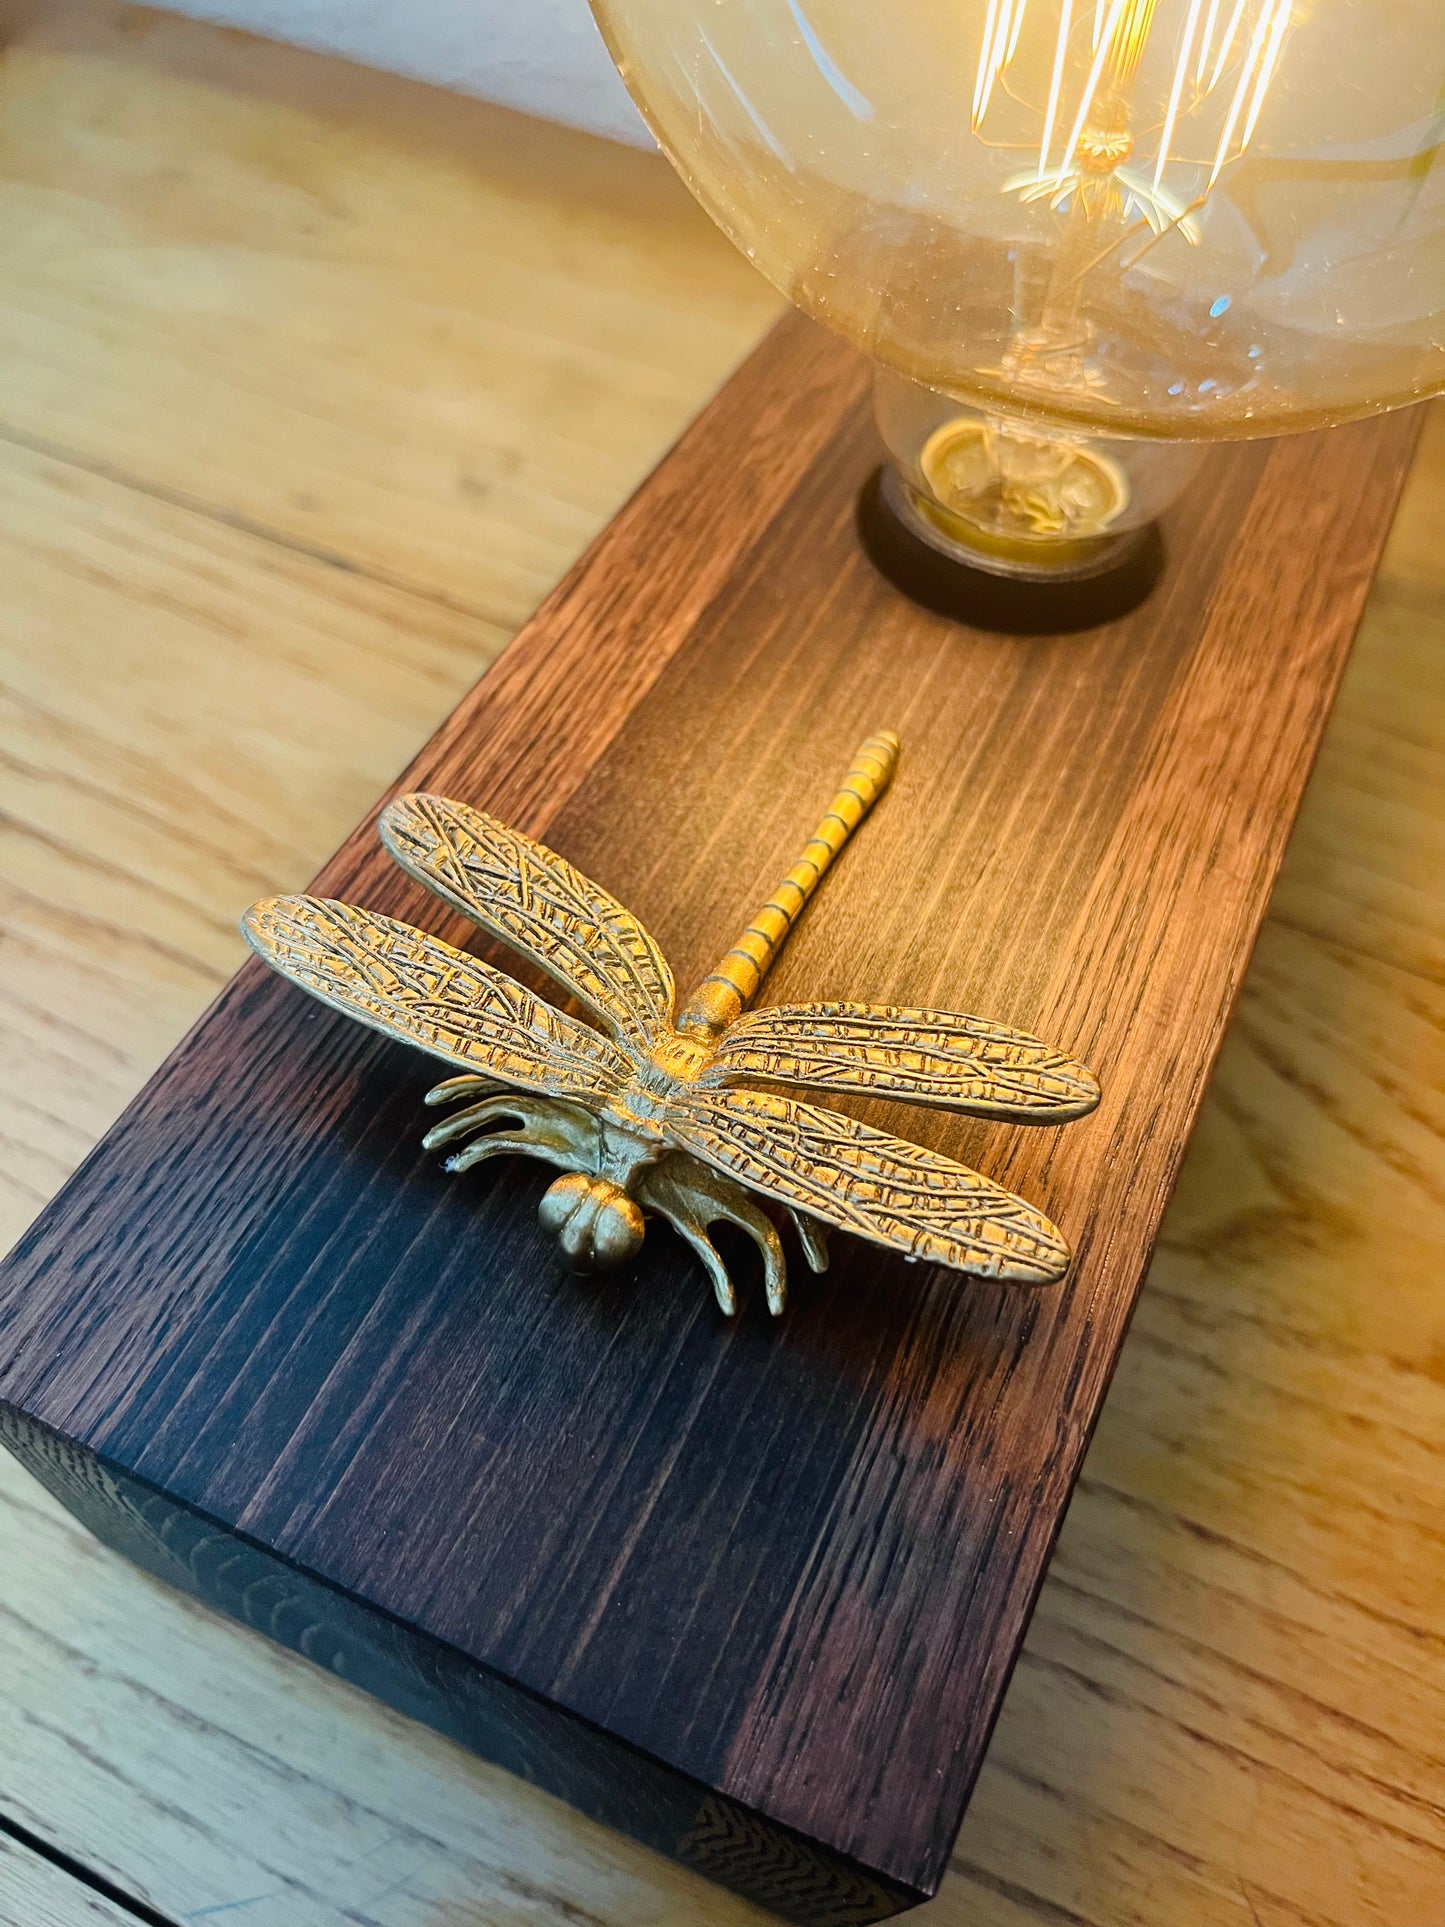 Dragonfly Lamp / Touch-Controlled